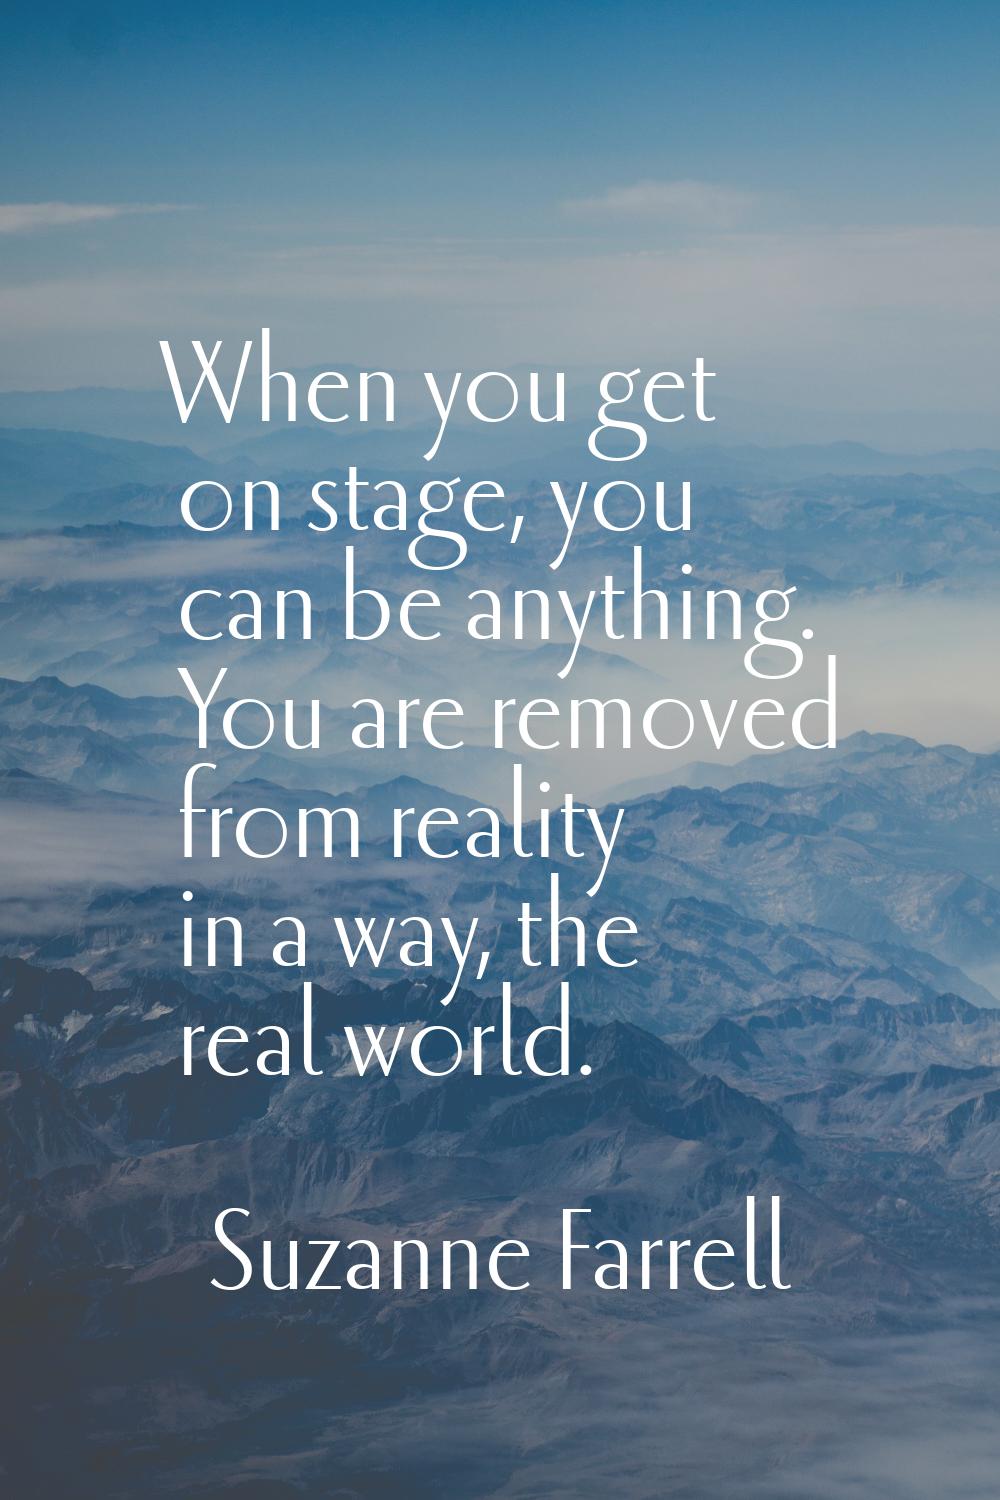 When you get on stage, you can be anything. You are removed from reality in a way, the real world.